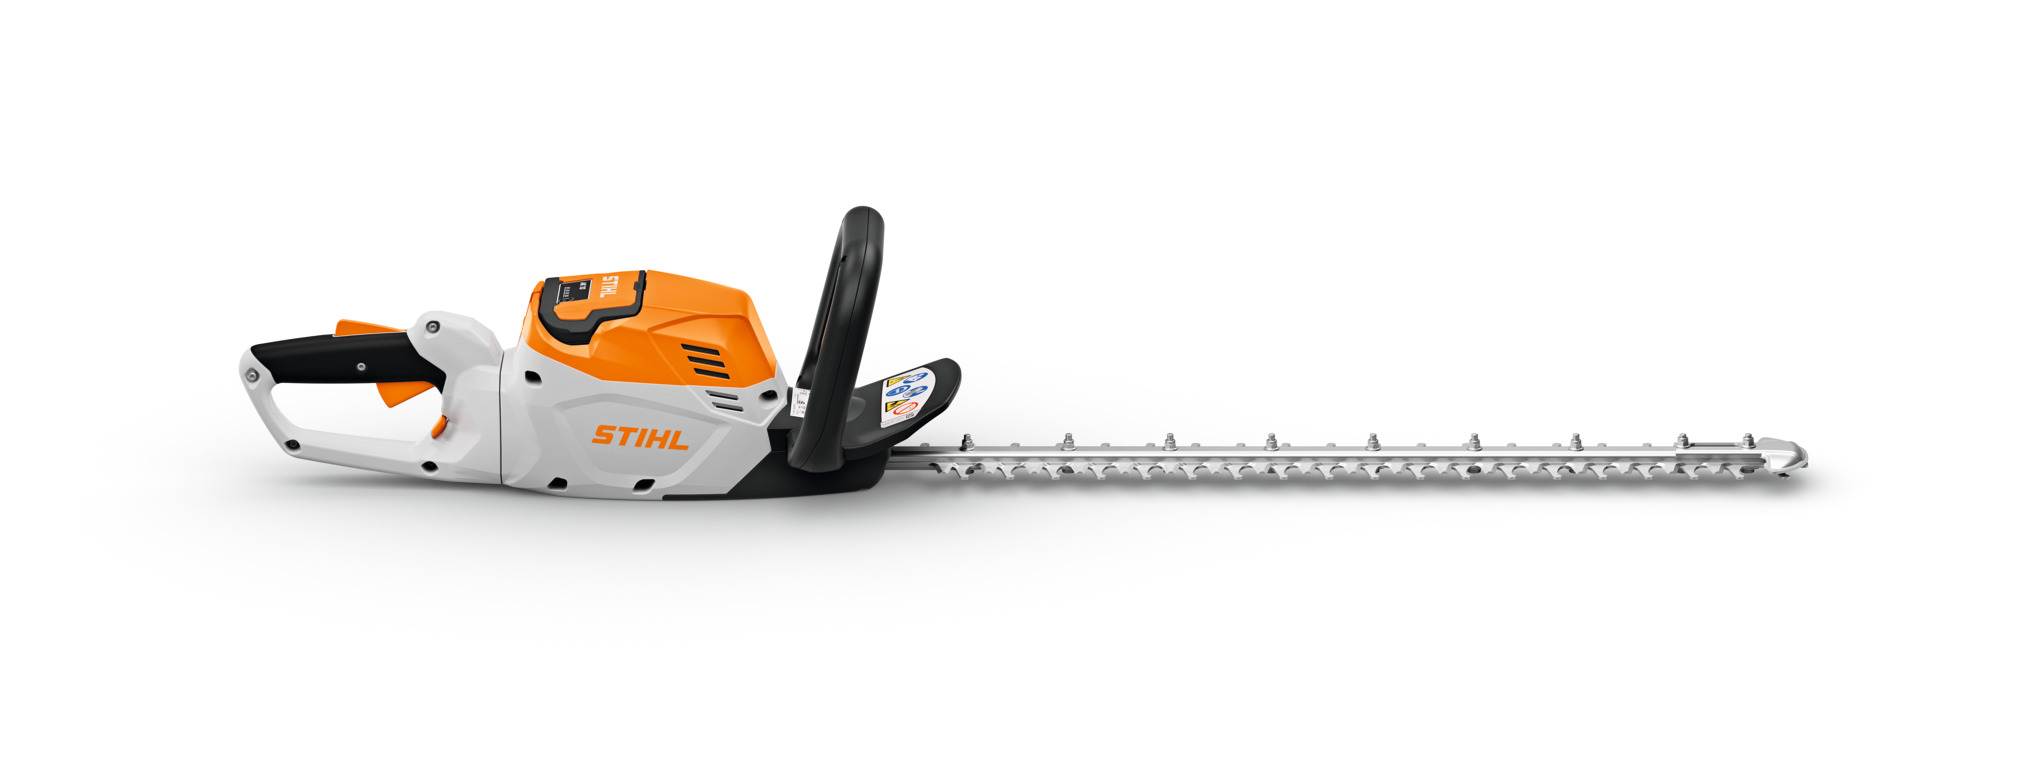 HSA 60 Cordless Hedge Trimmer